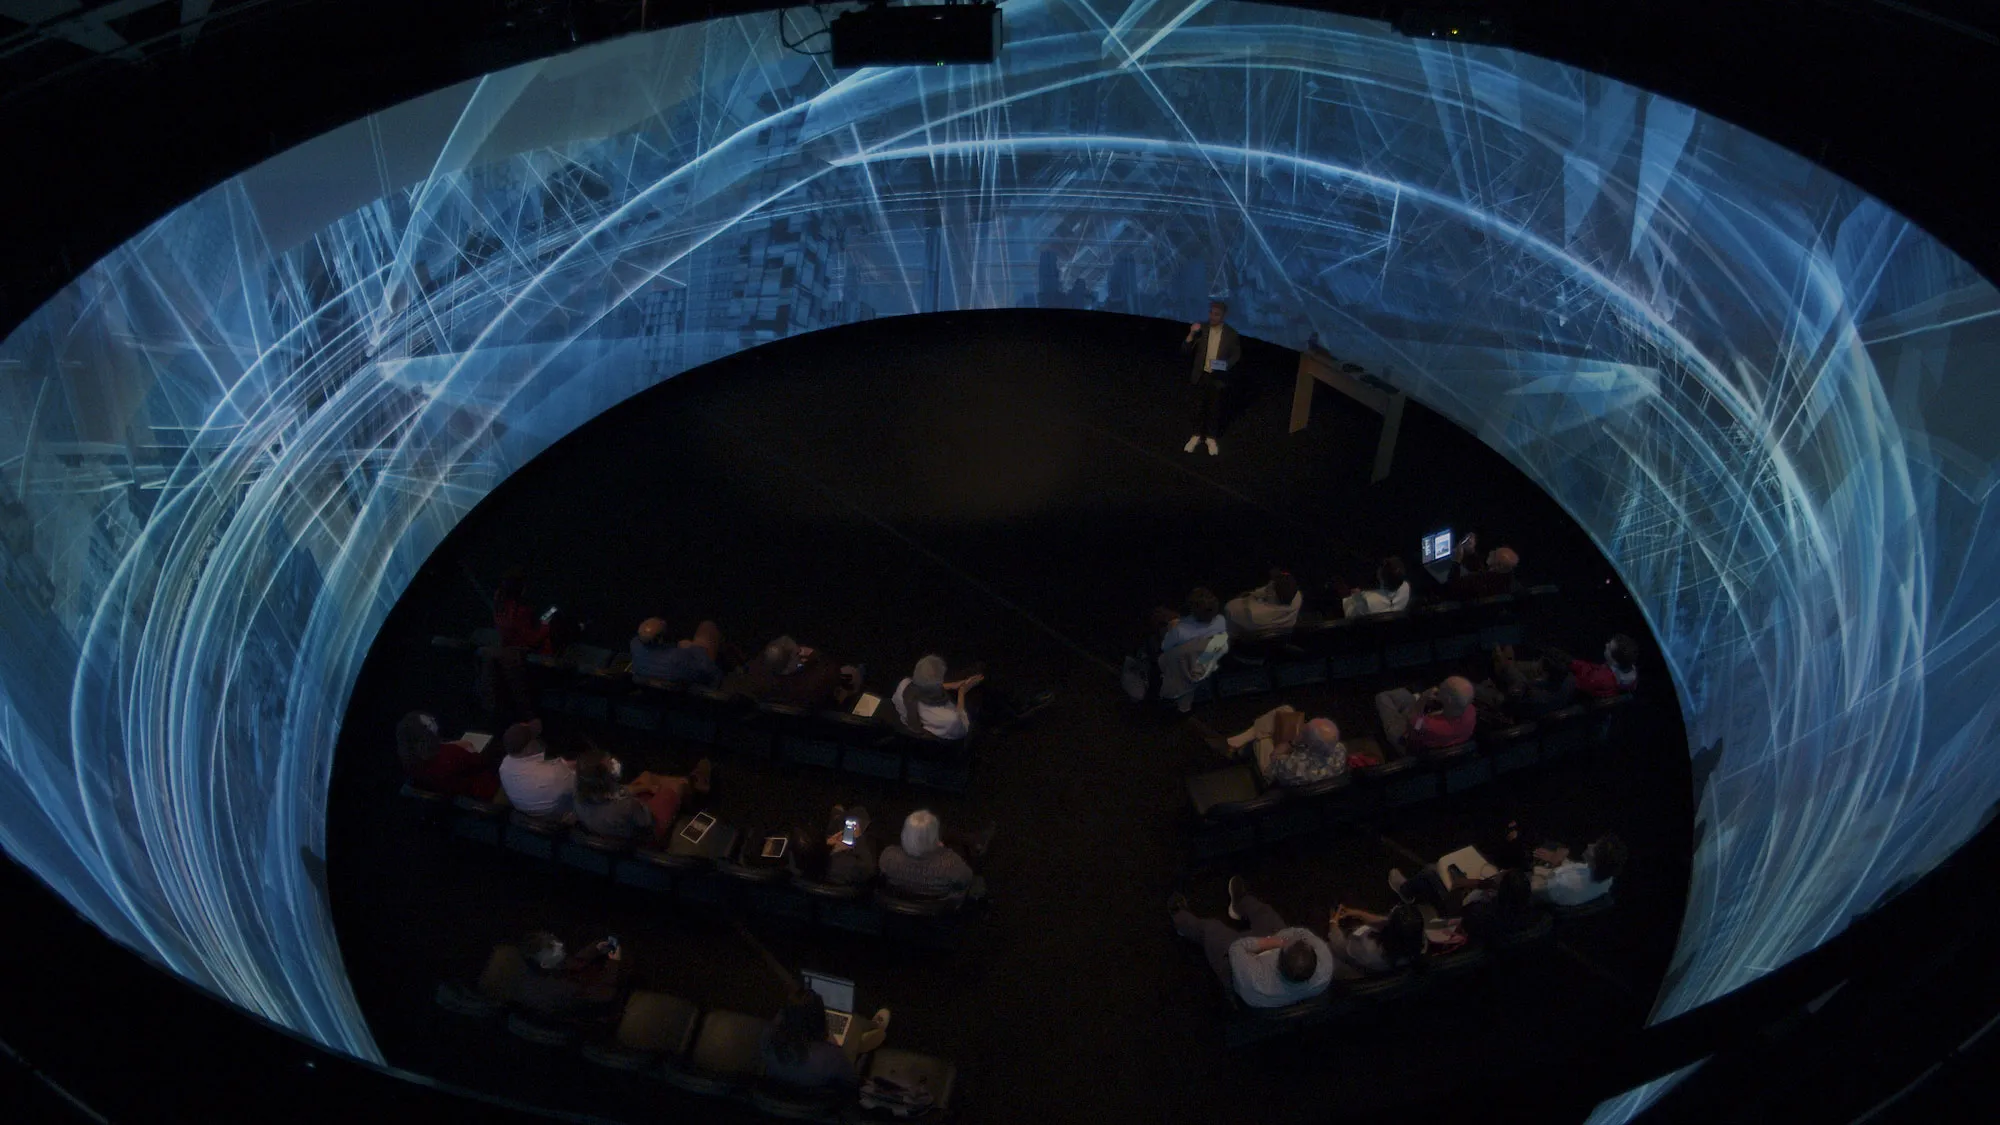 a group of people sit inside a 360 degree panoramic screen listening to a presentation. The screen has complex architectural imagery projected on it.